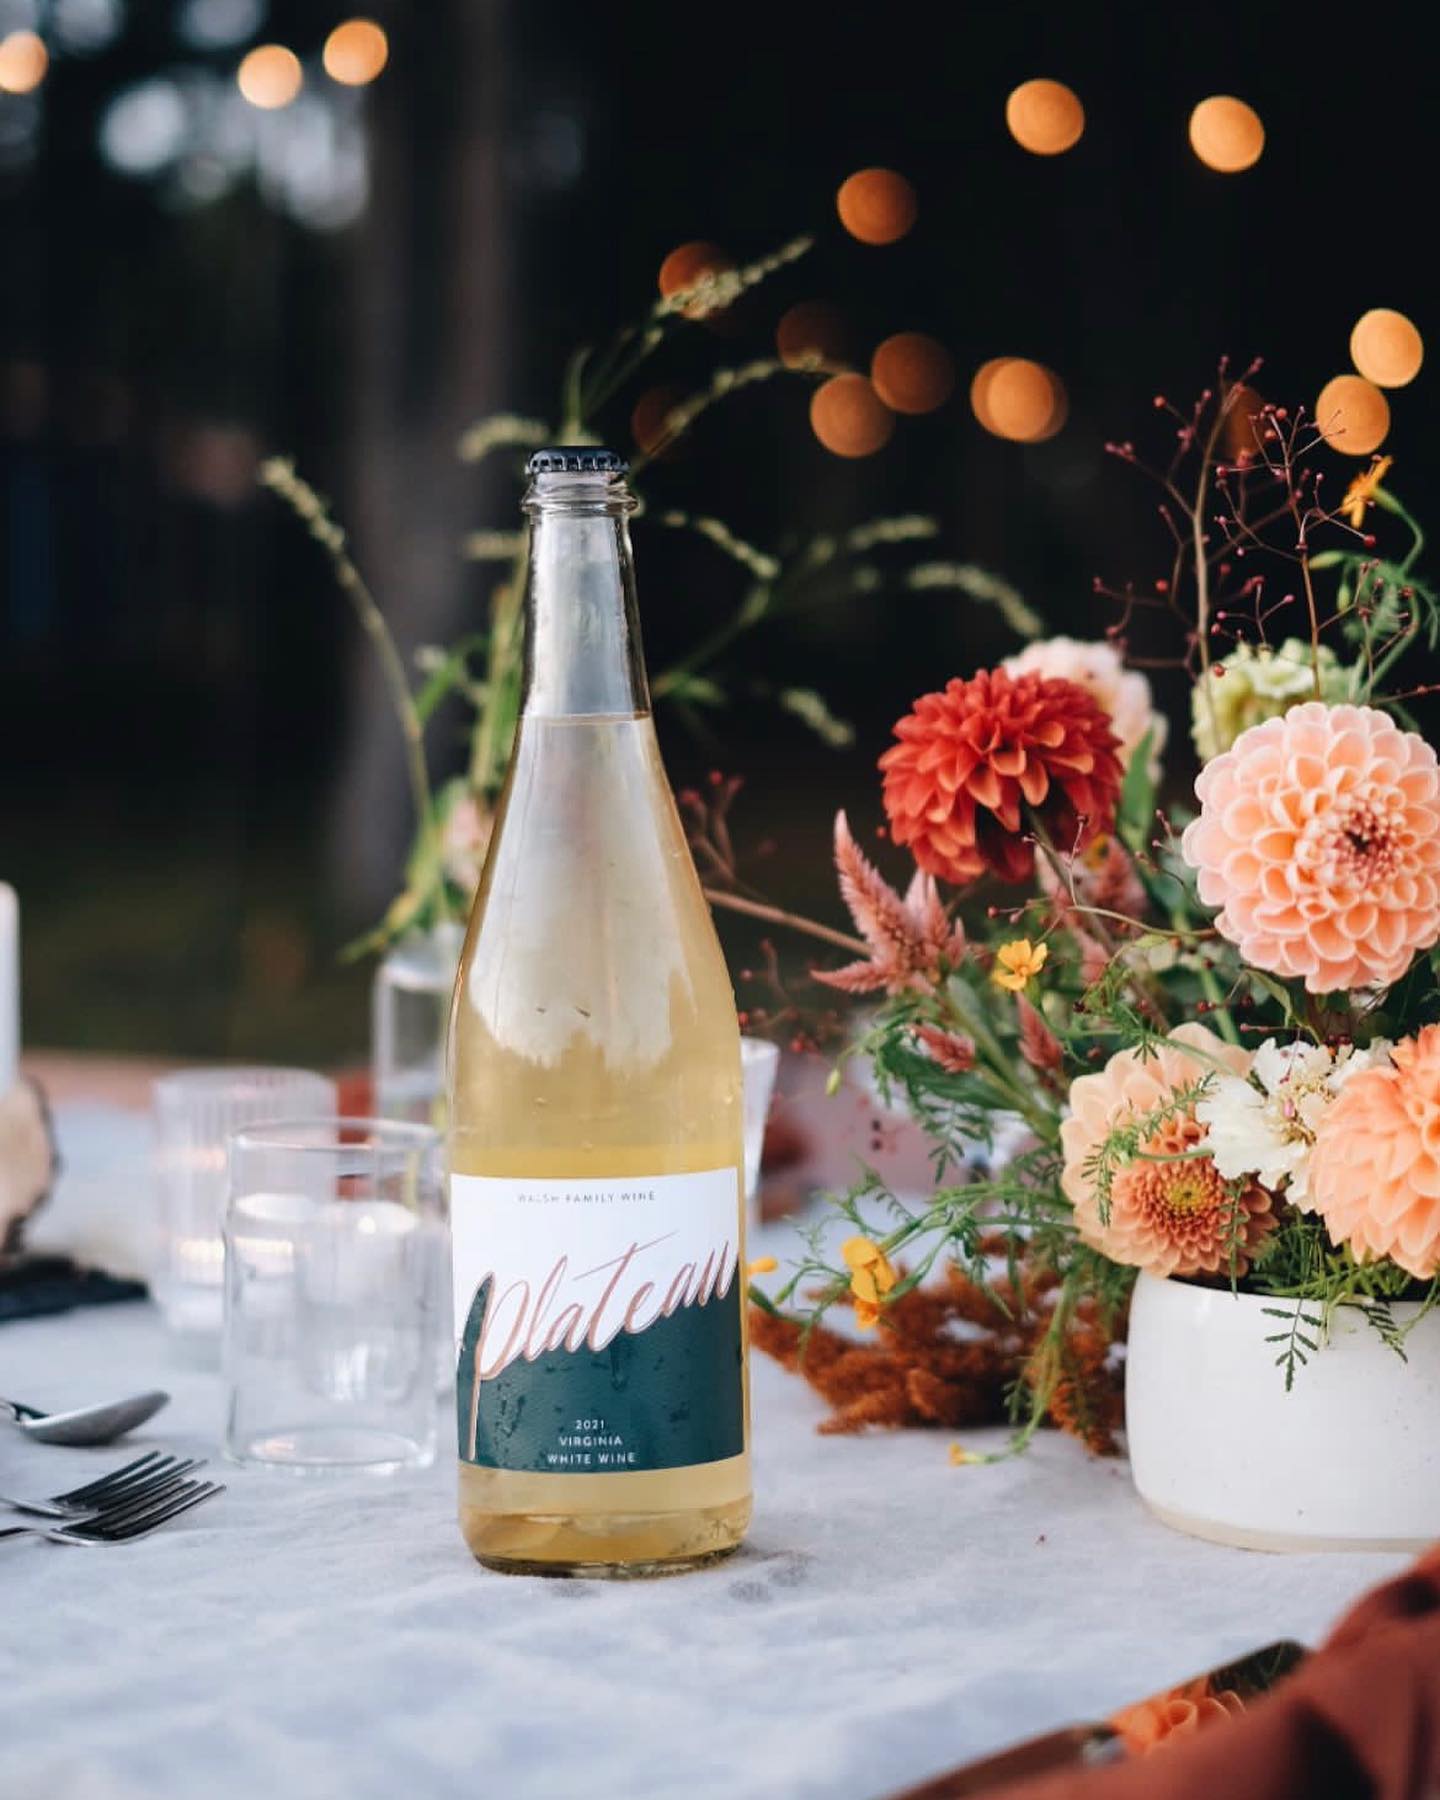 Bottle of Plateau sparkling wine on a formal dinner table